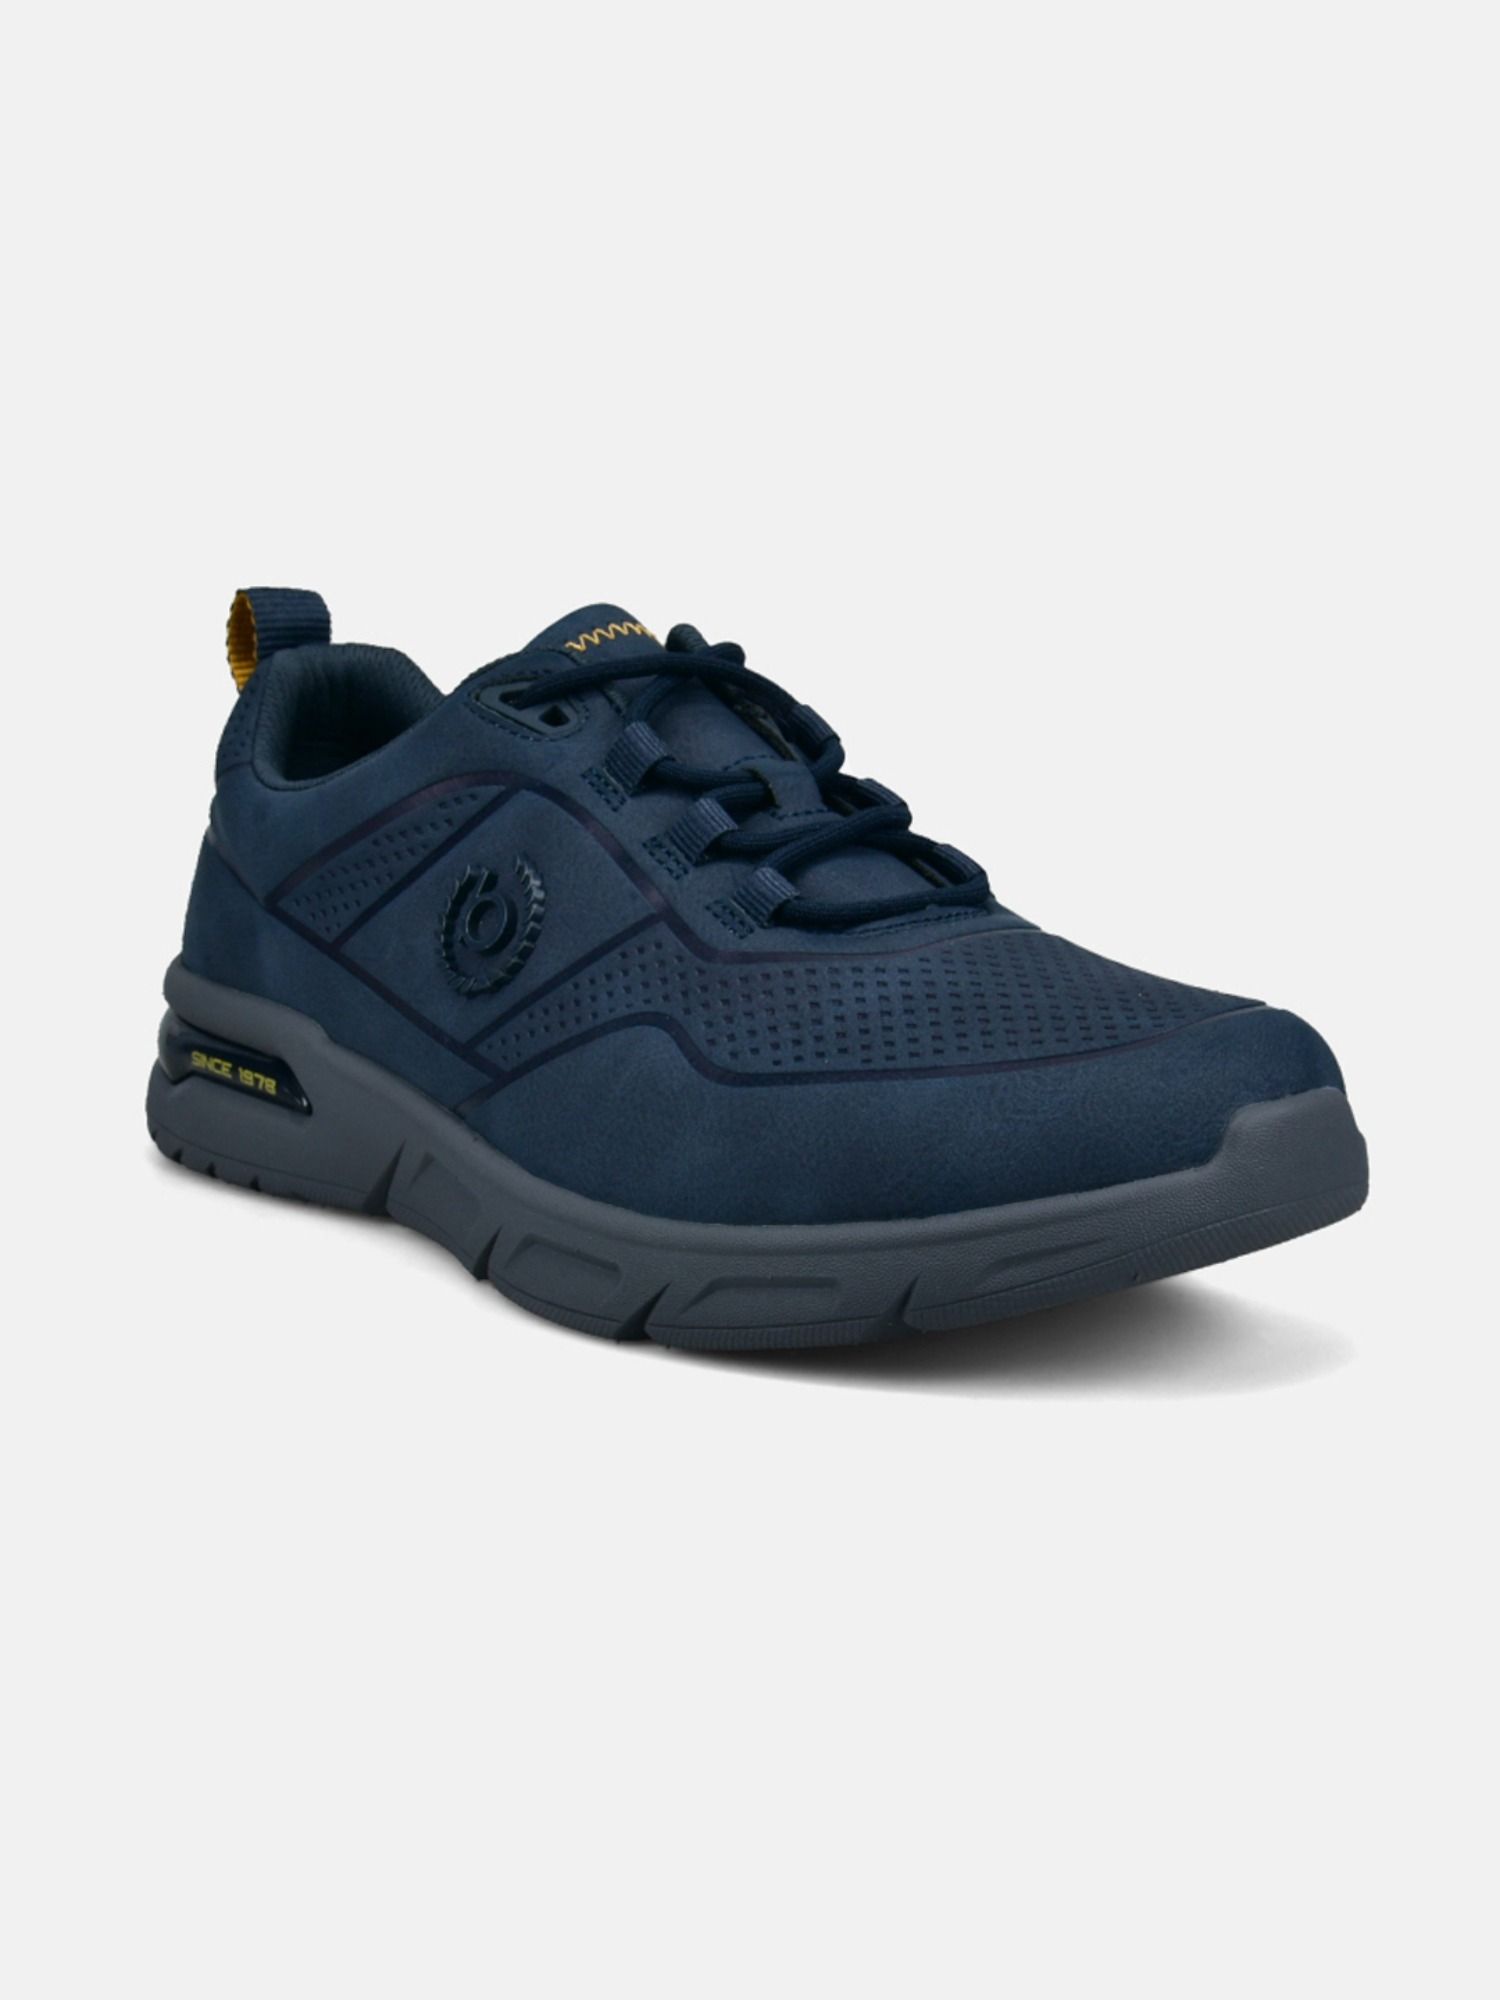 Blue Denim Lace Up Fashion Trainer By Bugatti At Walk In Style